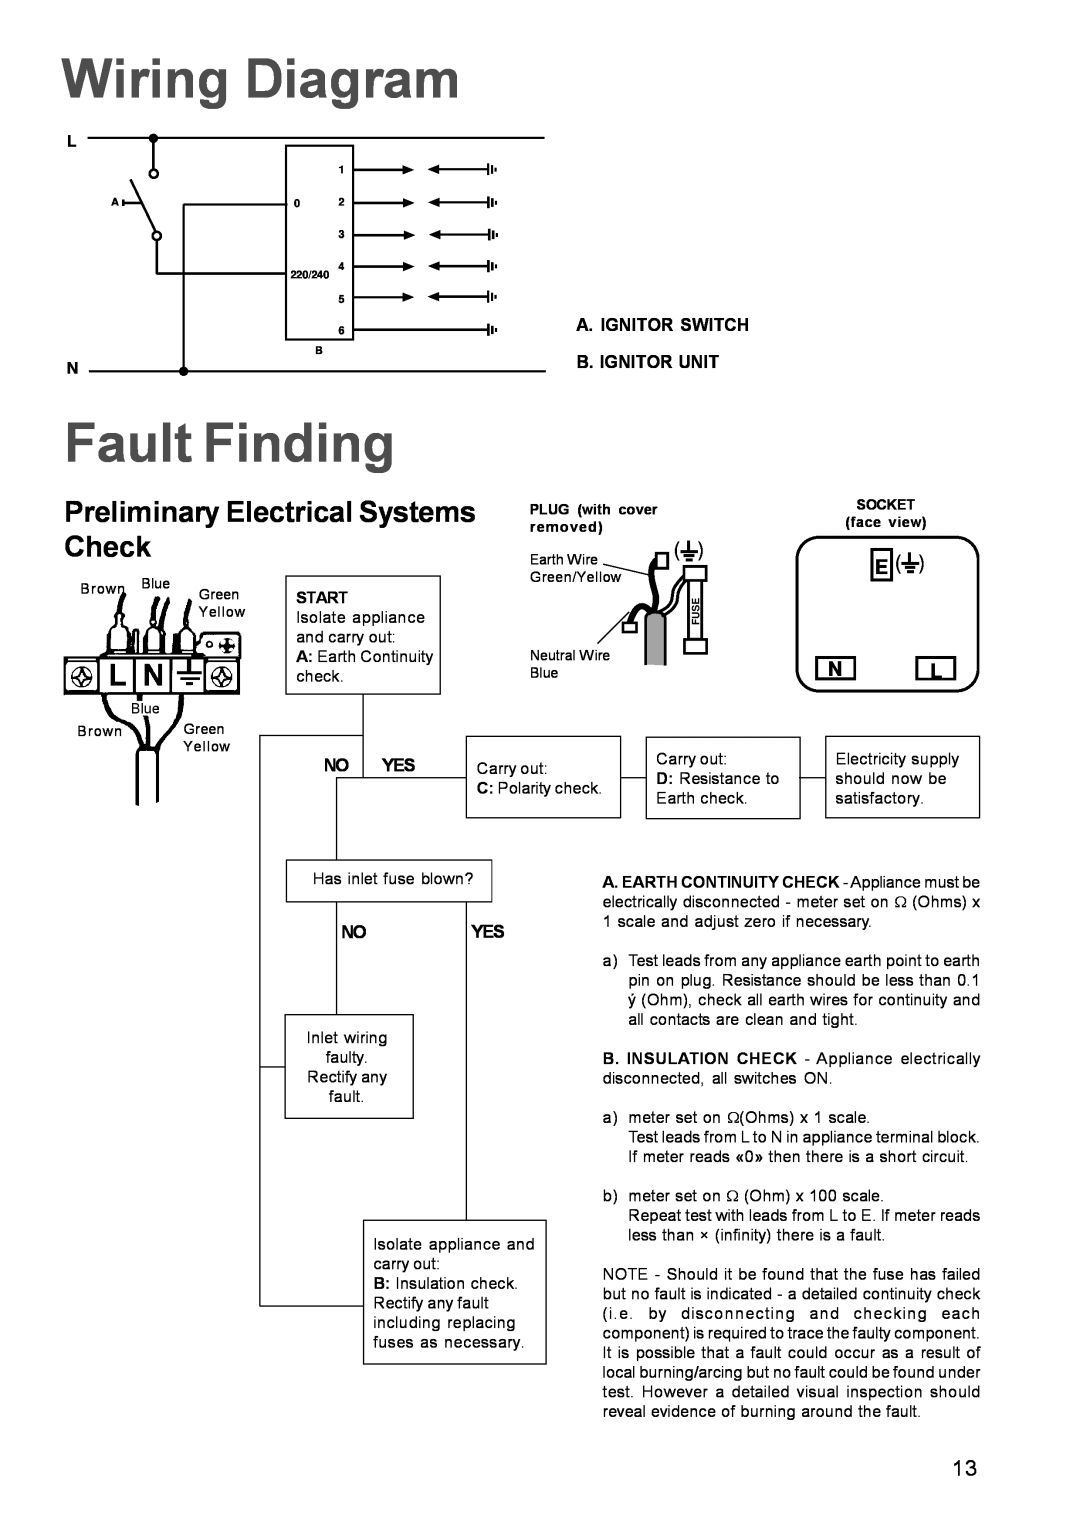 Zanussi GAS HOB manual Wiring Diagram, Fault Finding, Preliminary Electrical Systems, Check 